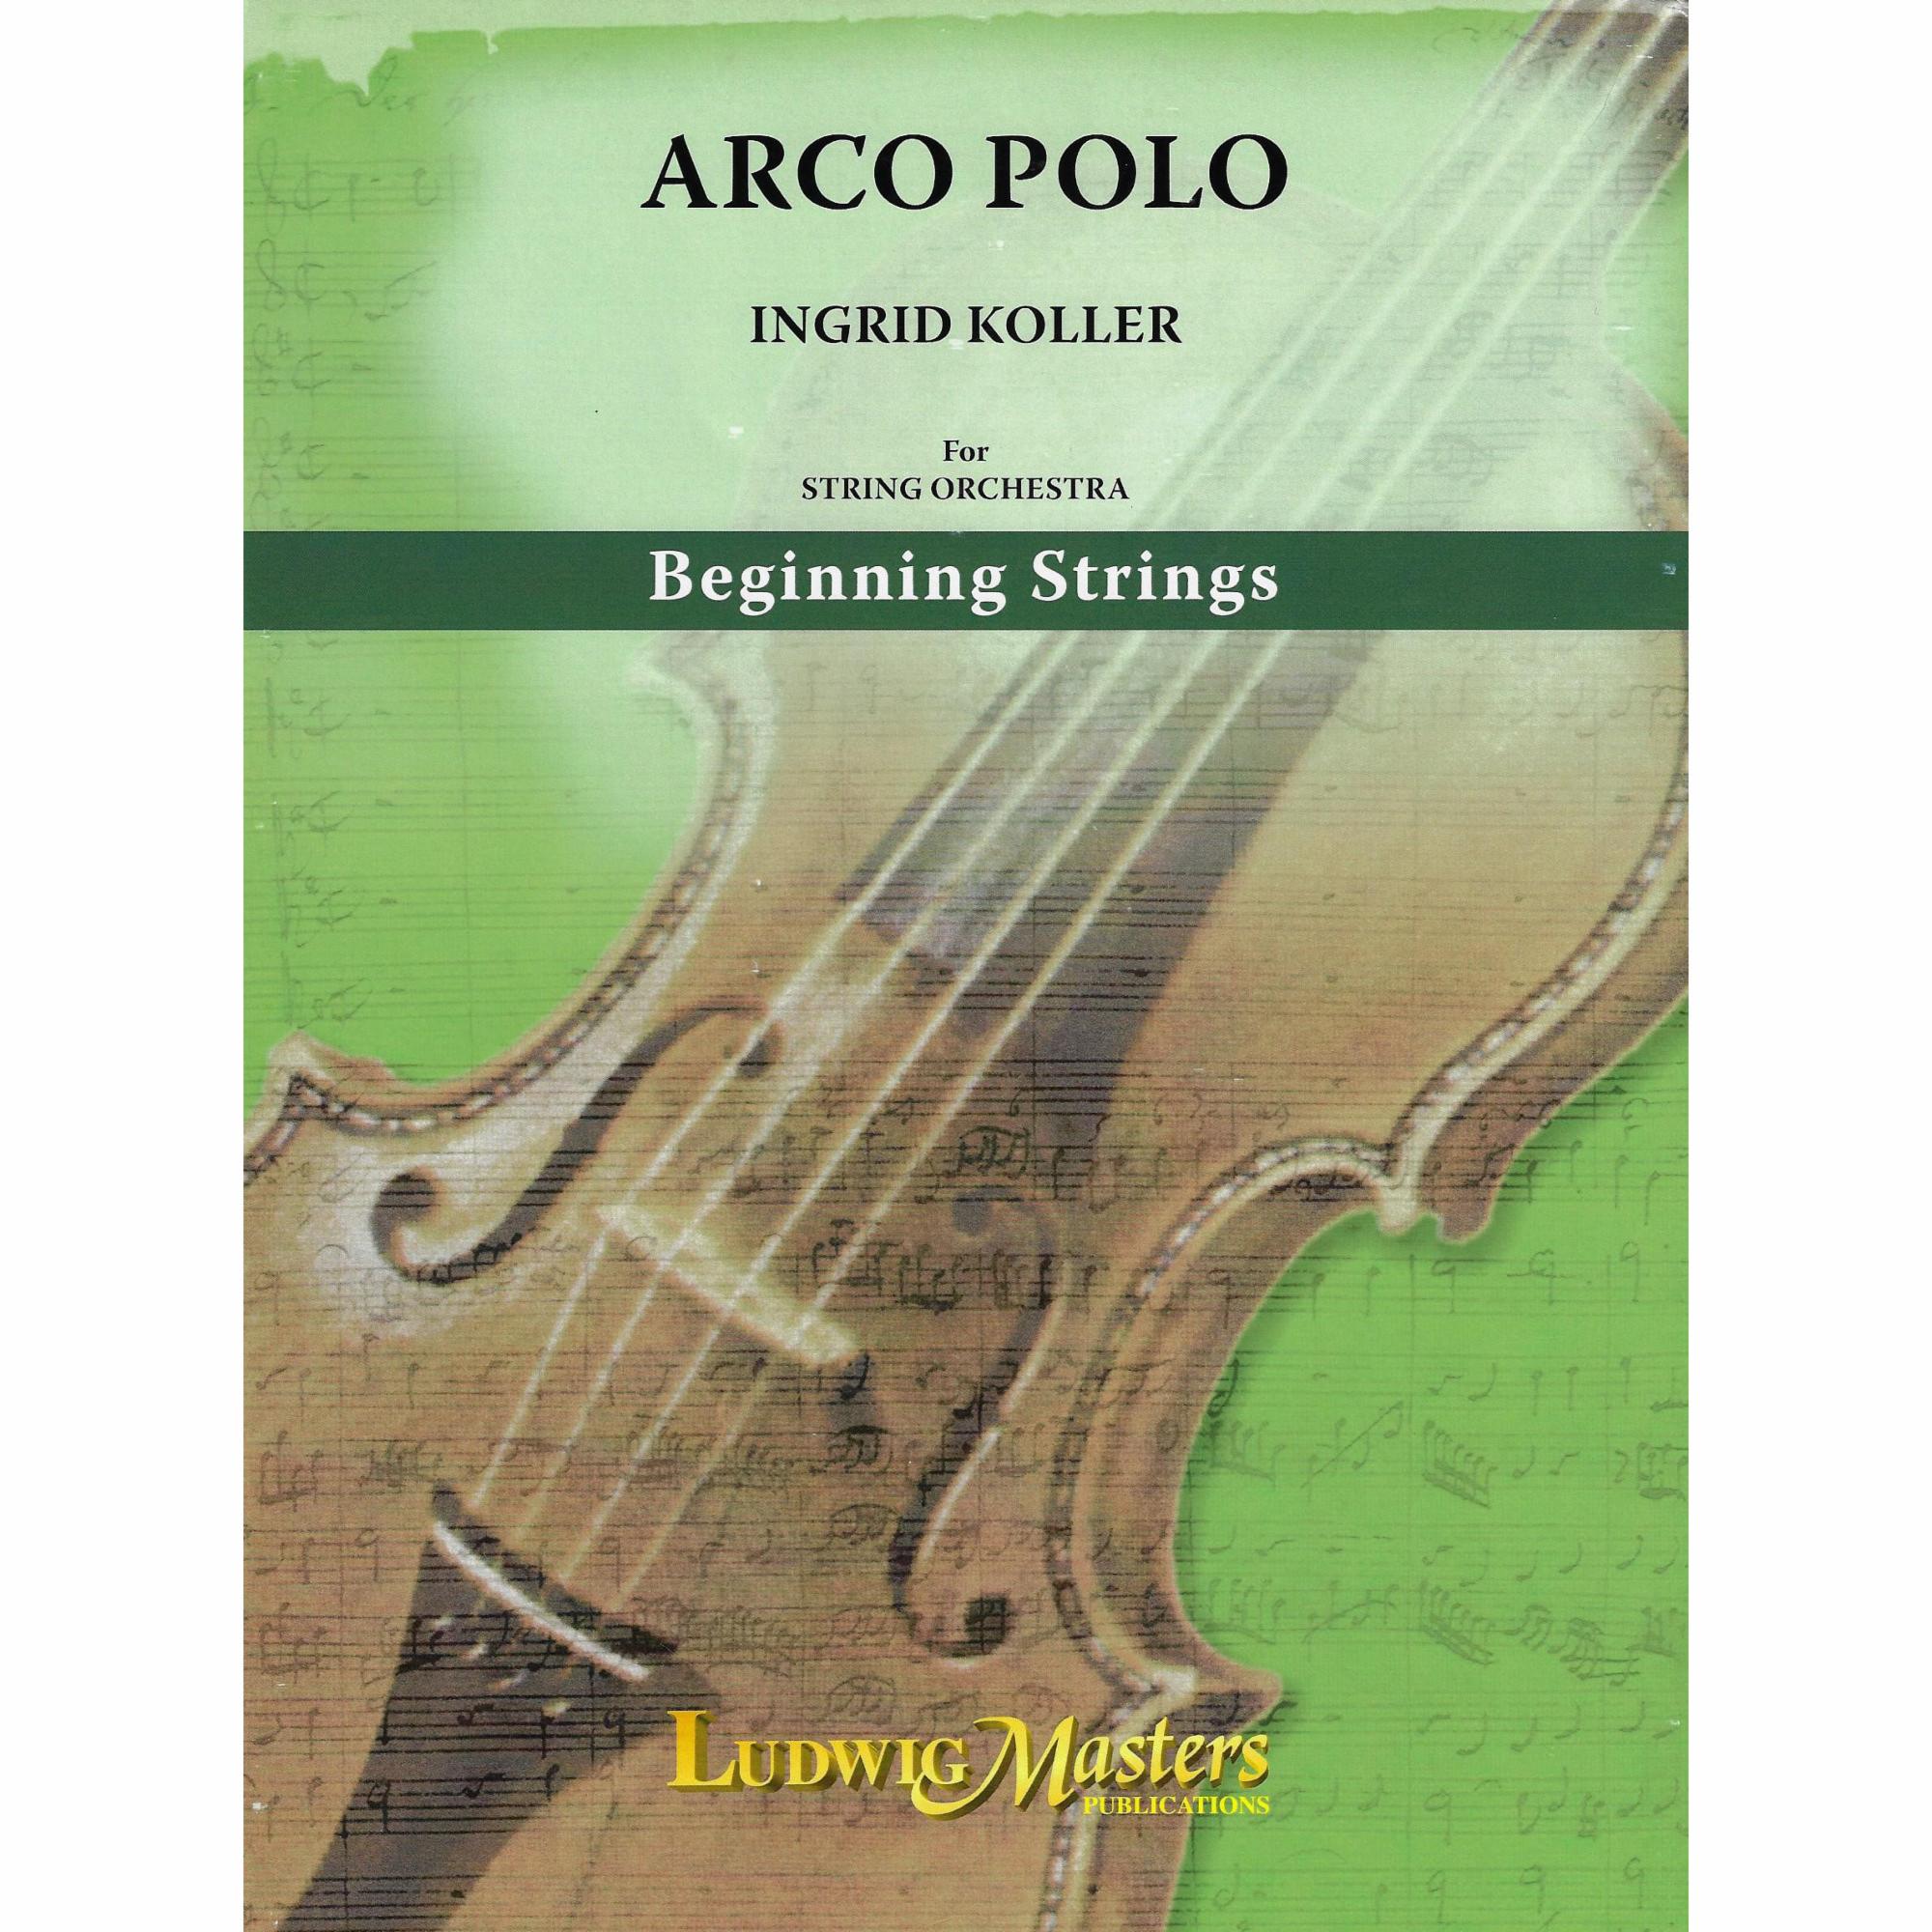 Arco Polo for String Orchestra